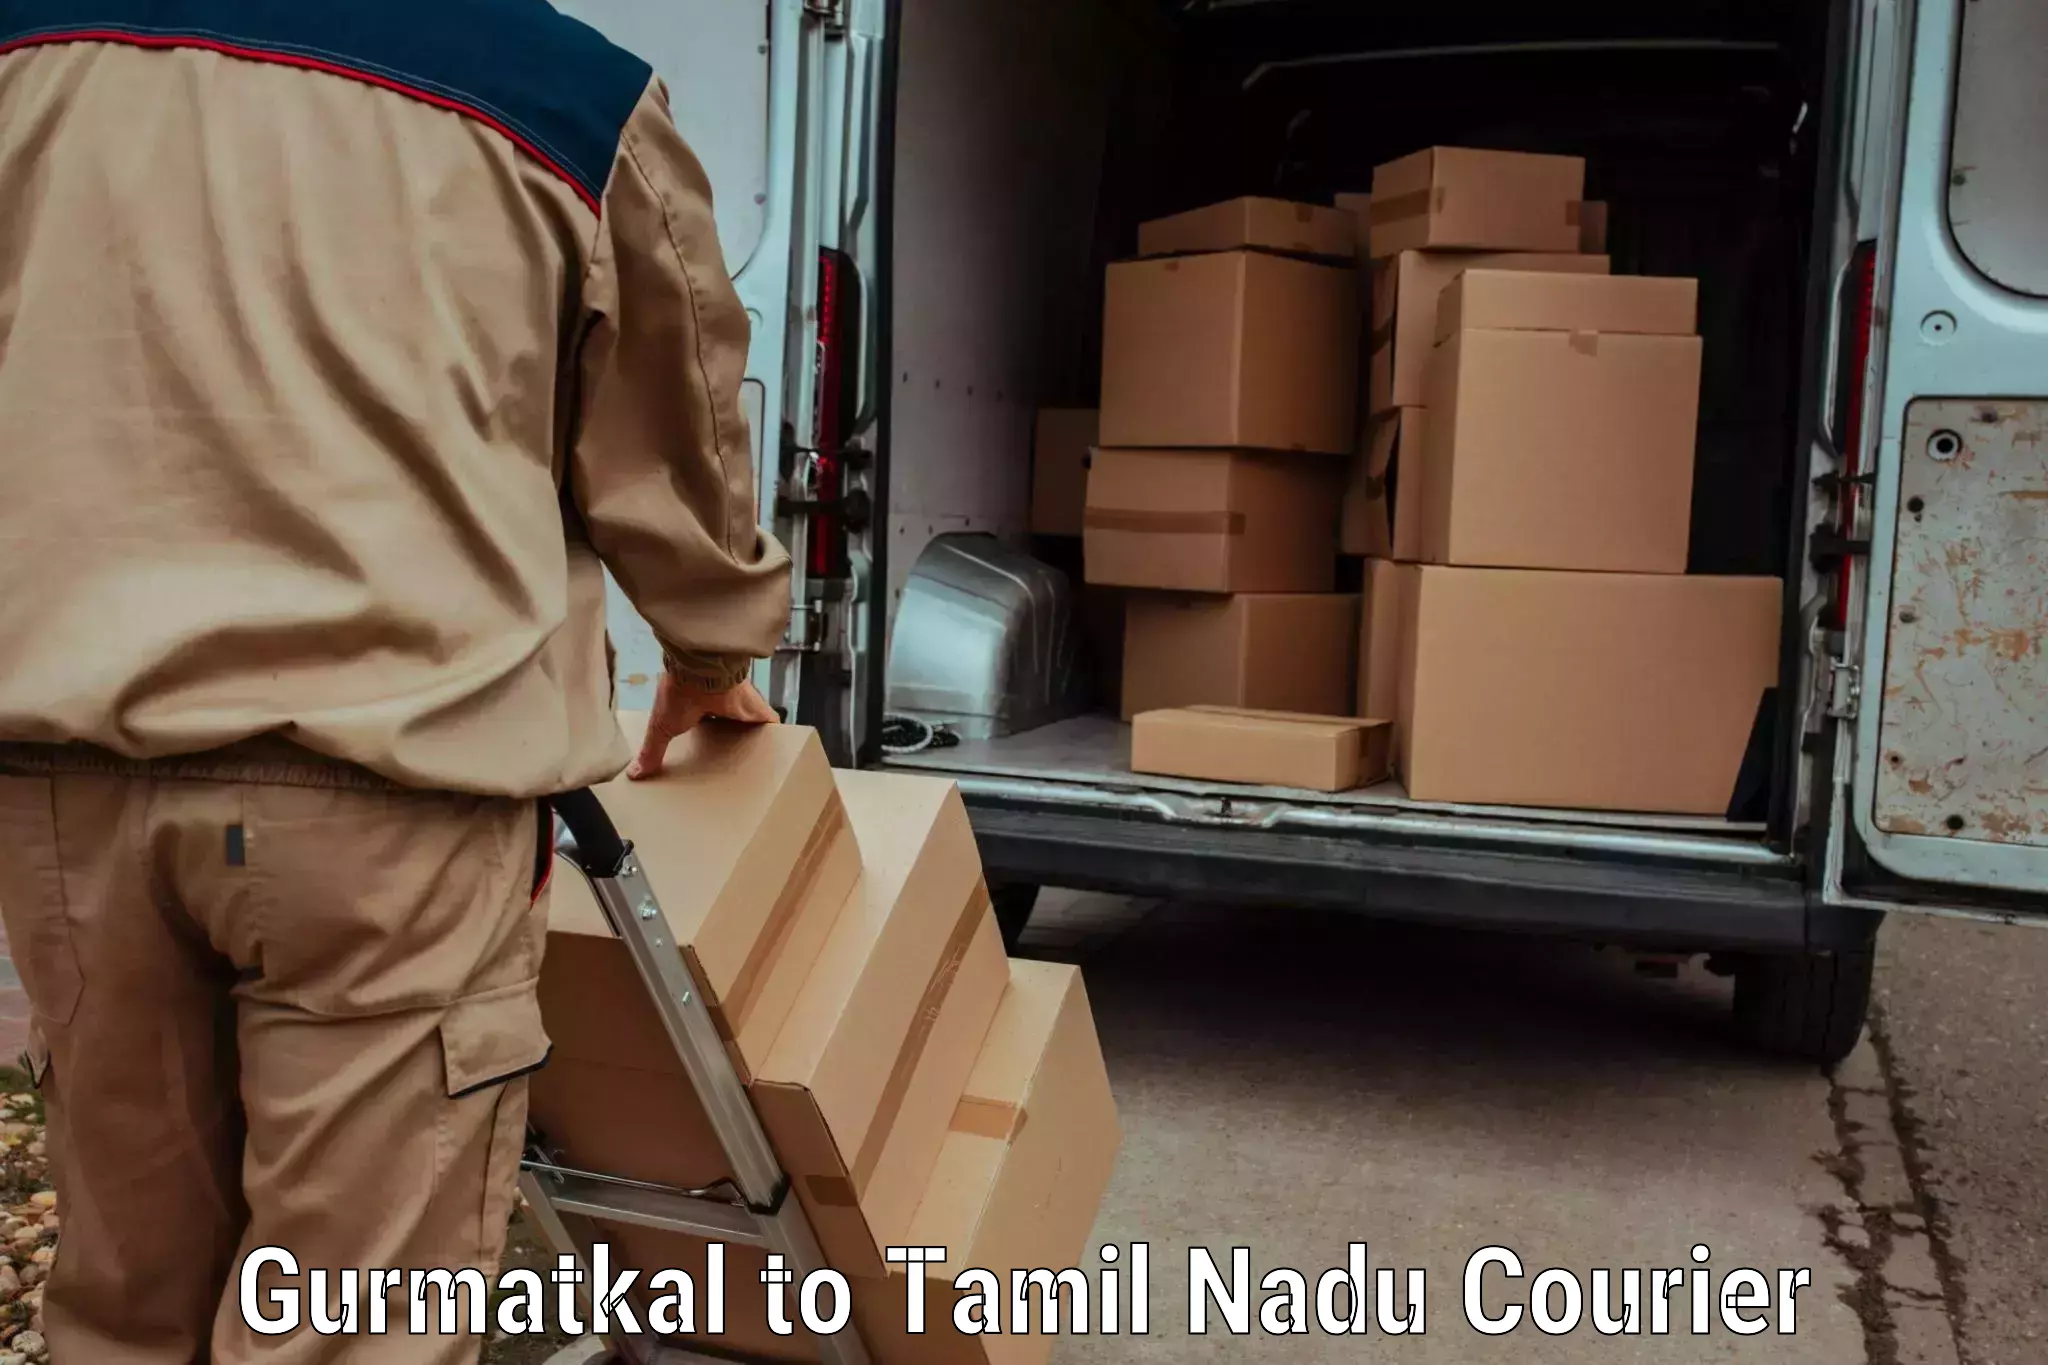 24-hour delivery options Gurmatkal to Gobichettipalayam